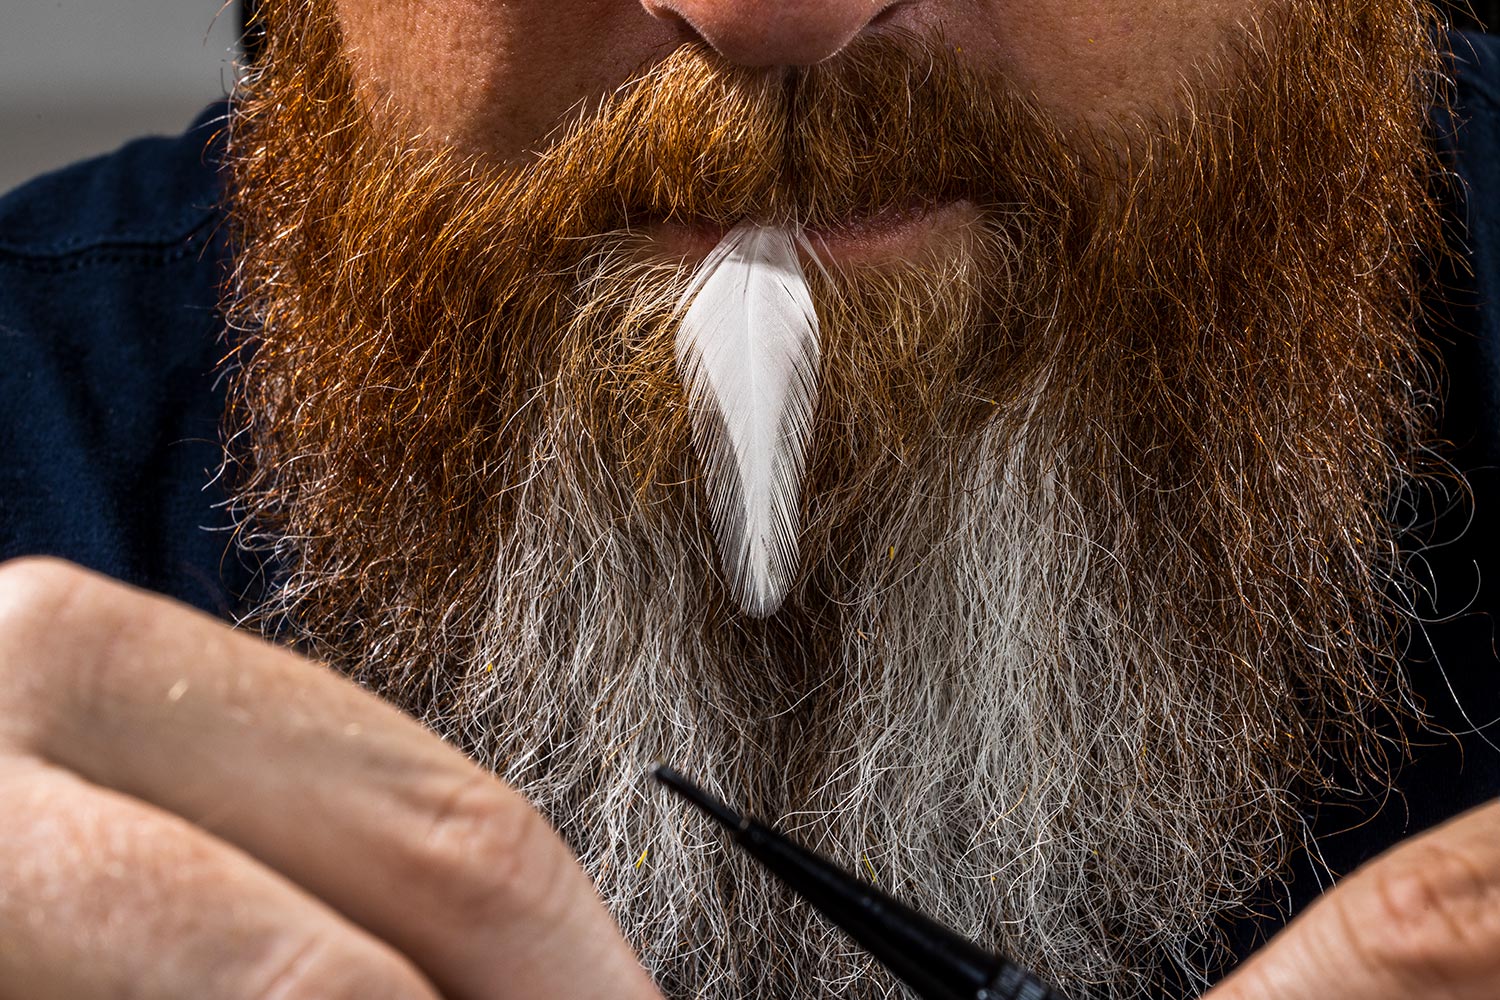 Close-up of the feather in Brandon Bailes' mouth while tying a bow tie